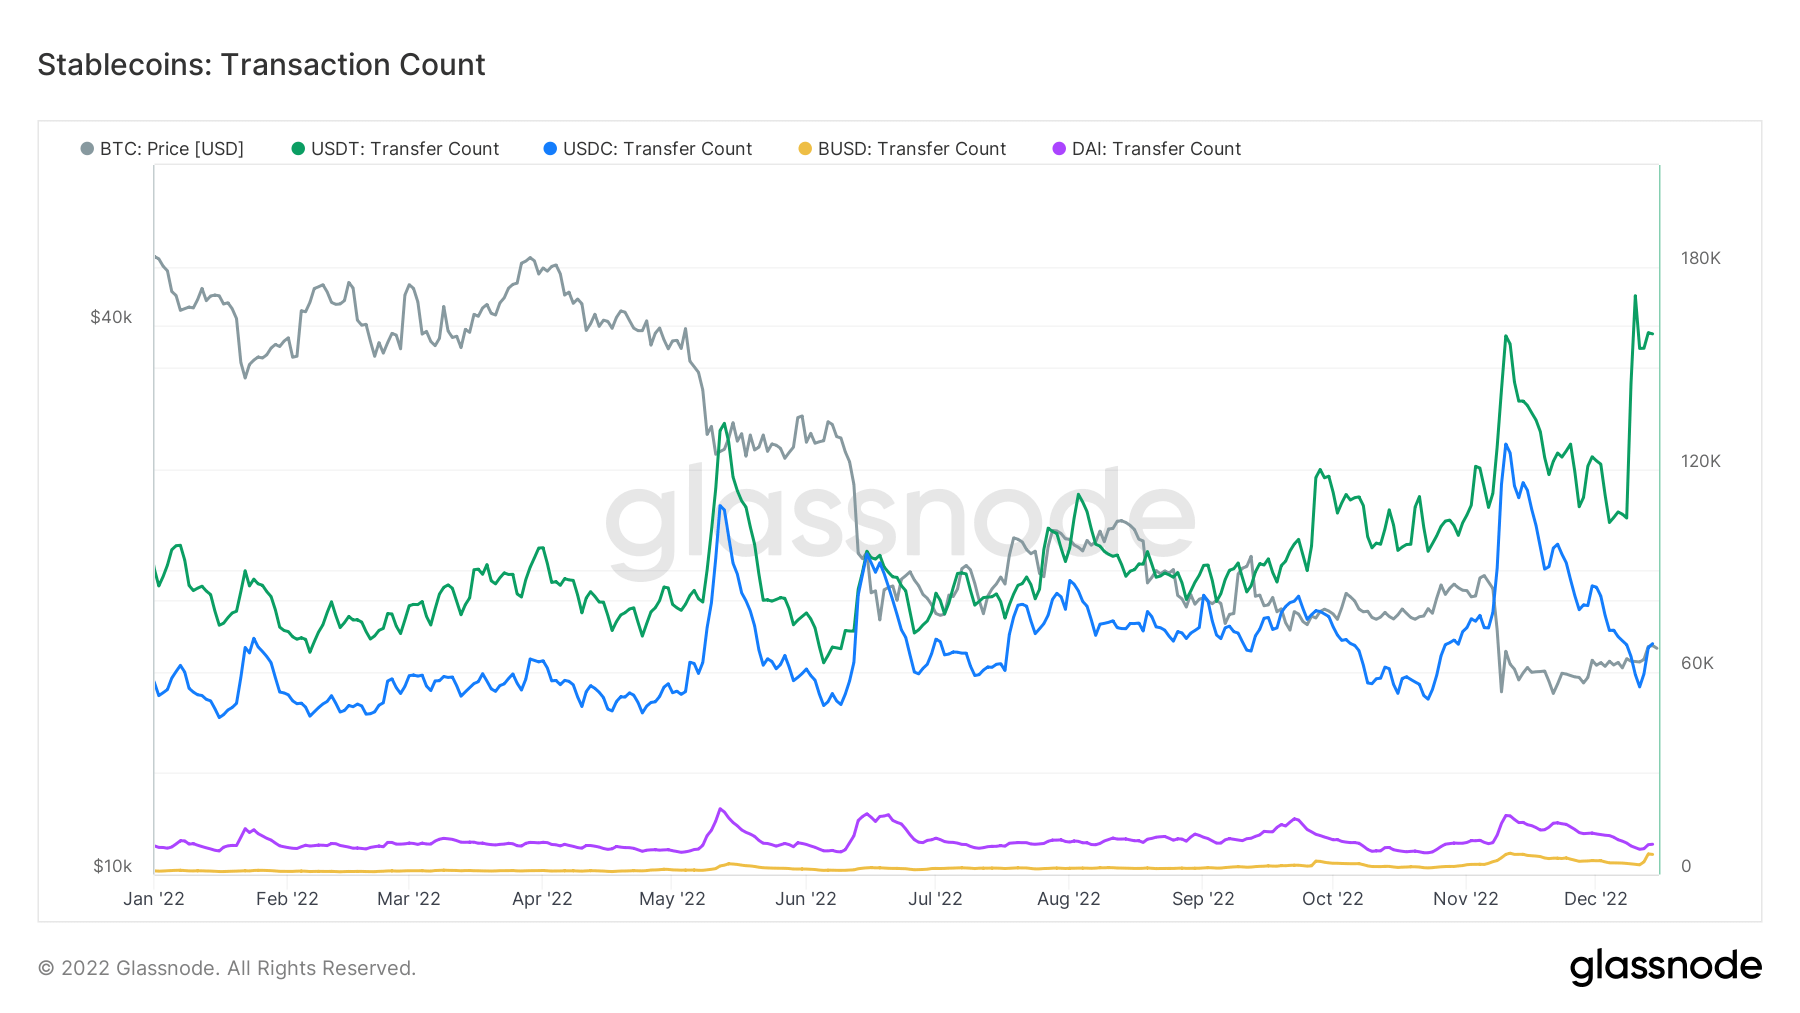 Stablecoins: Transaction Count